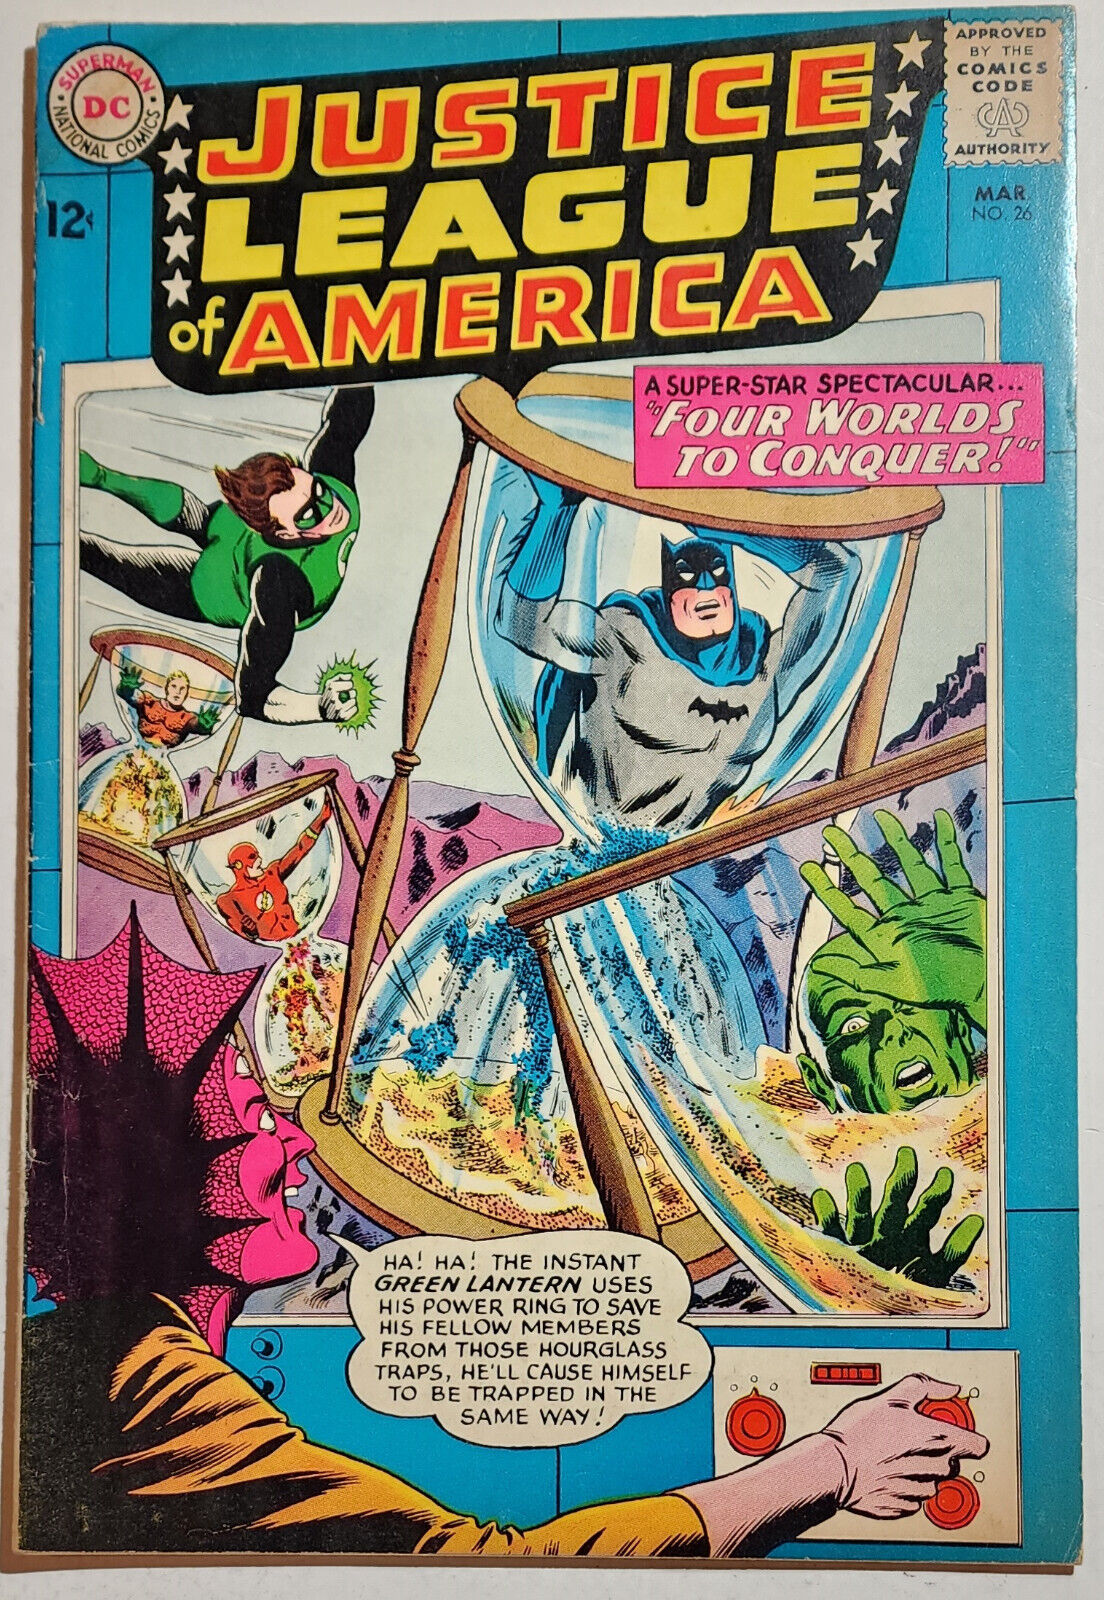 JUSTICE LEAGUE of AMERICA #26 1964 Silver Age DC